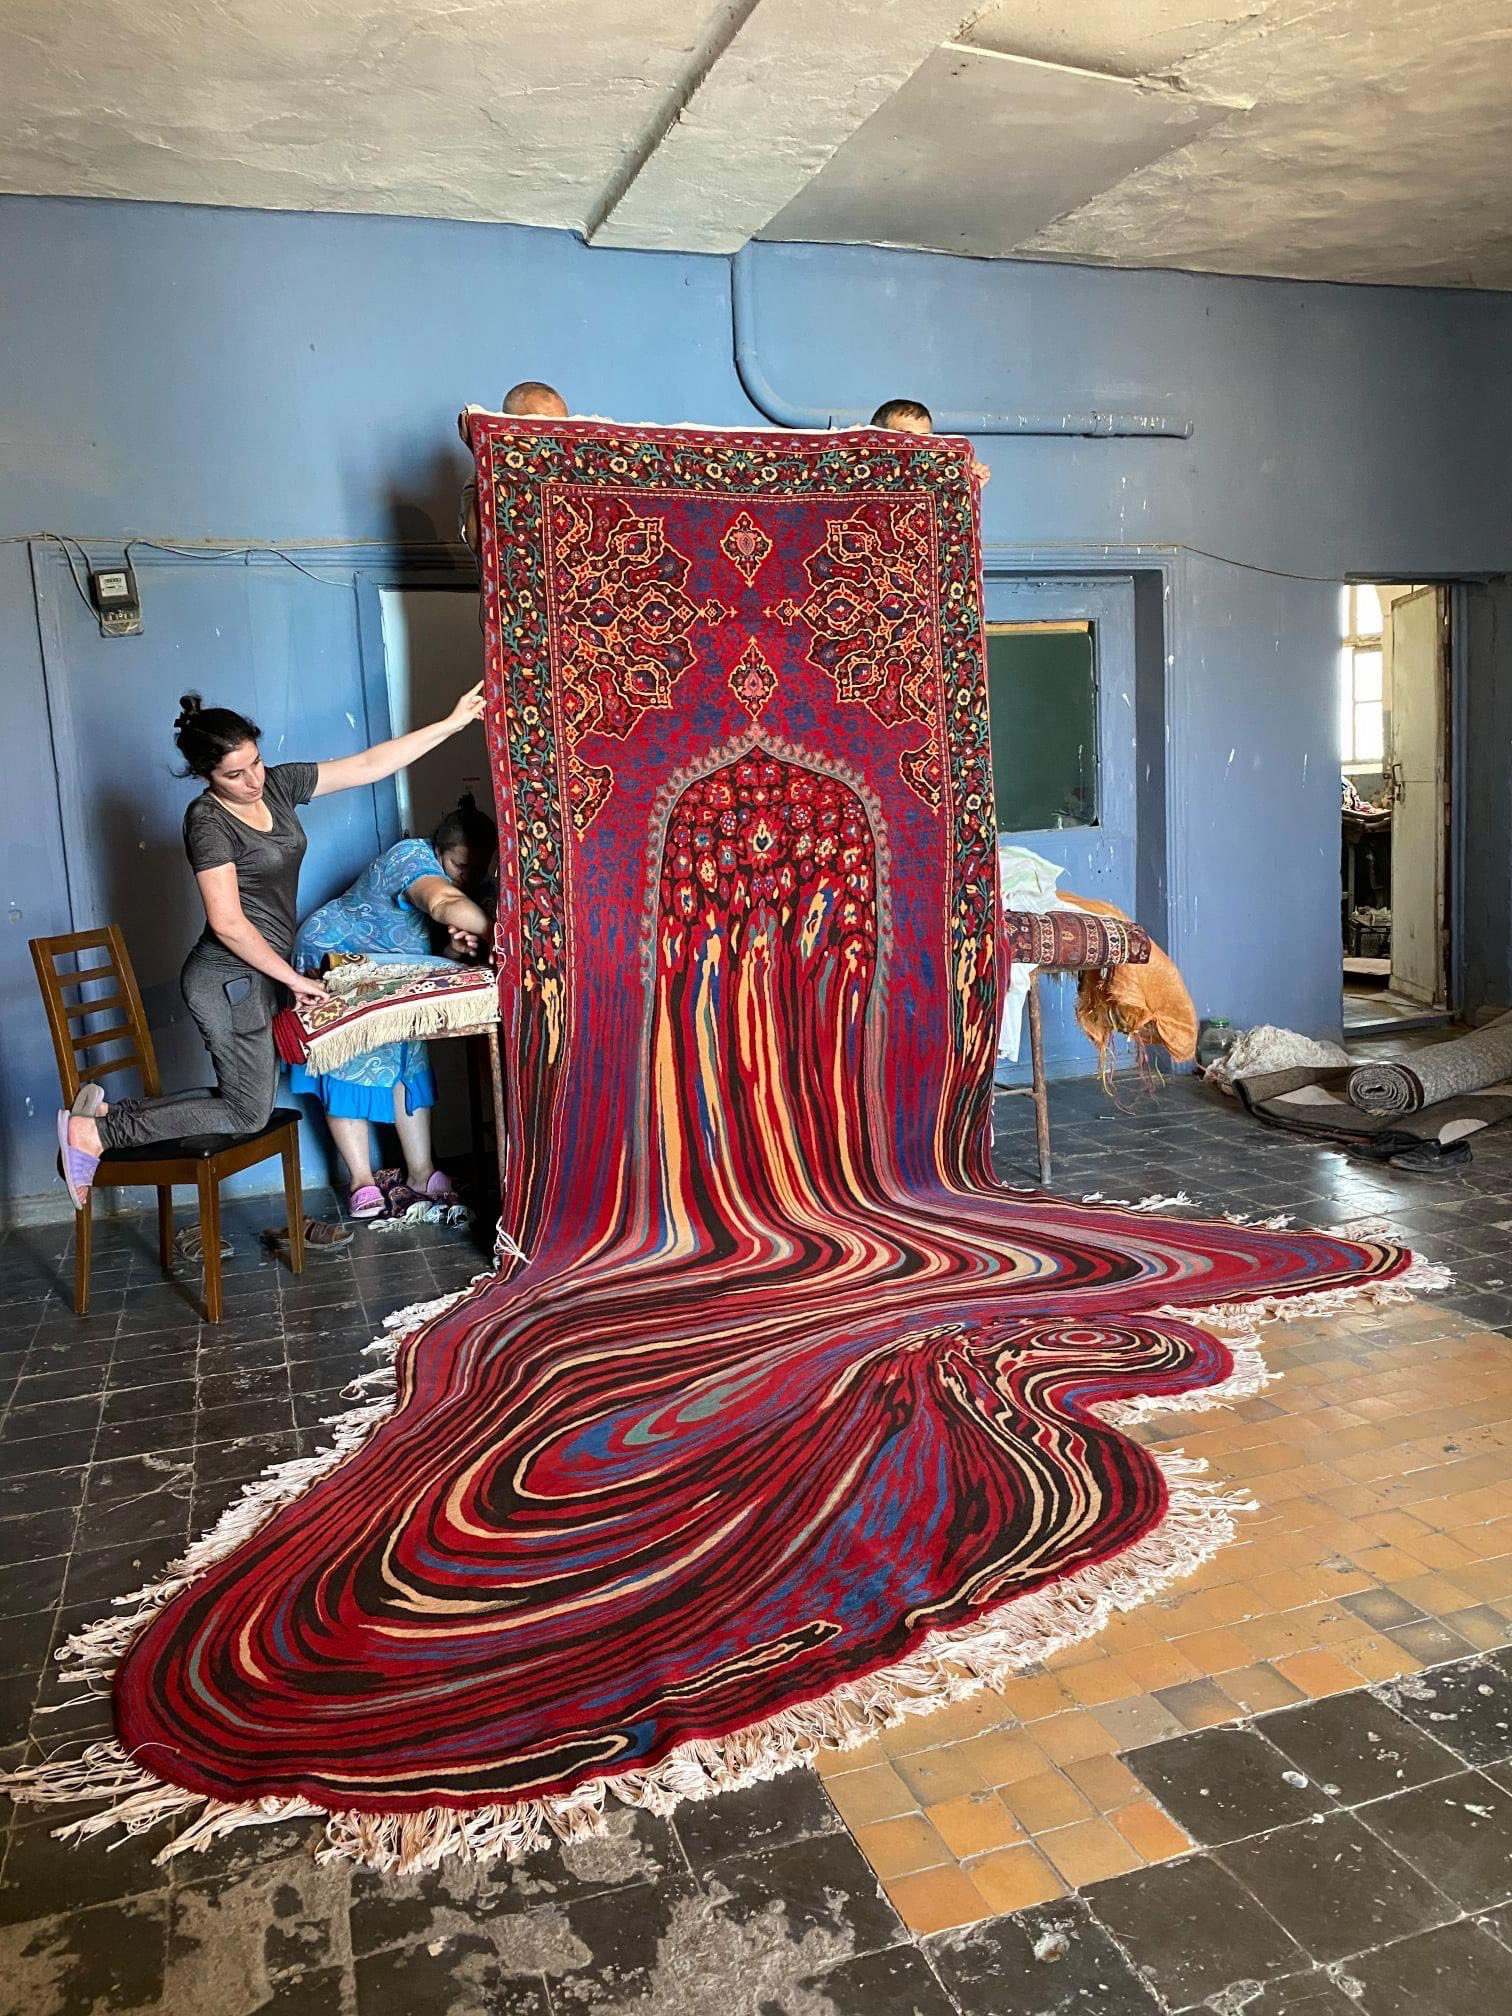 A Staggering Sculptural Rug by Artist Faig Ahmed Pours into an Amorphous Puddle | Colossal 美陈网站 美陈前沿 